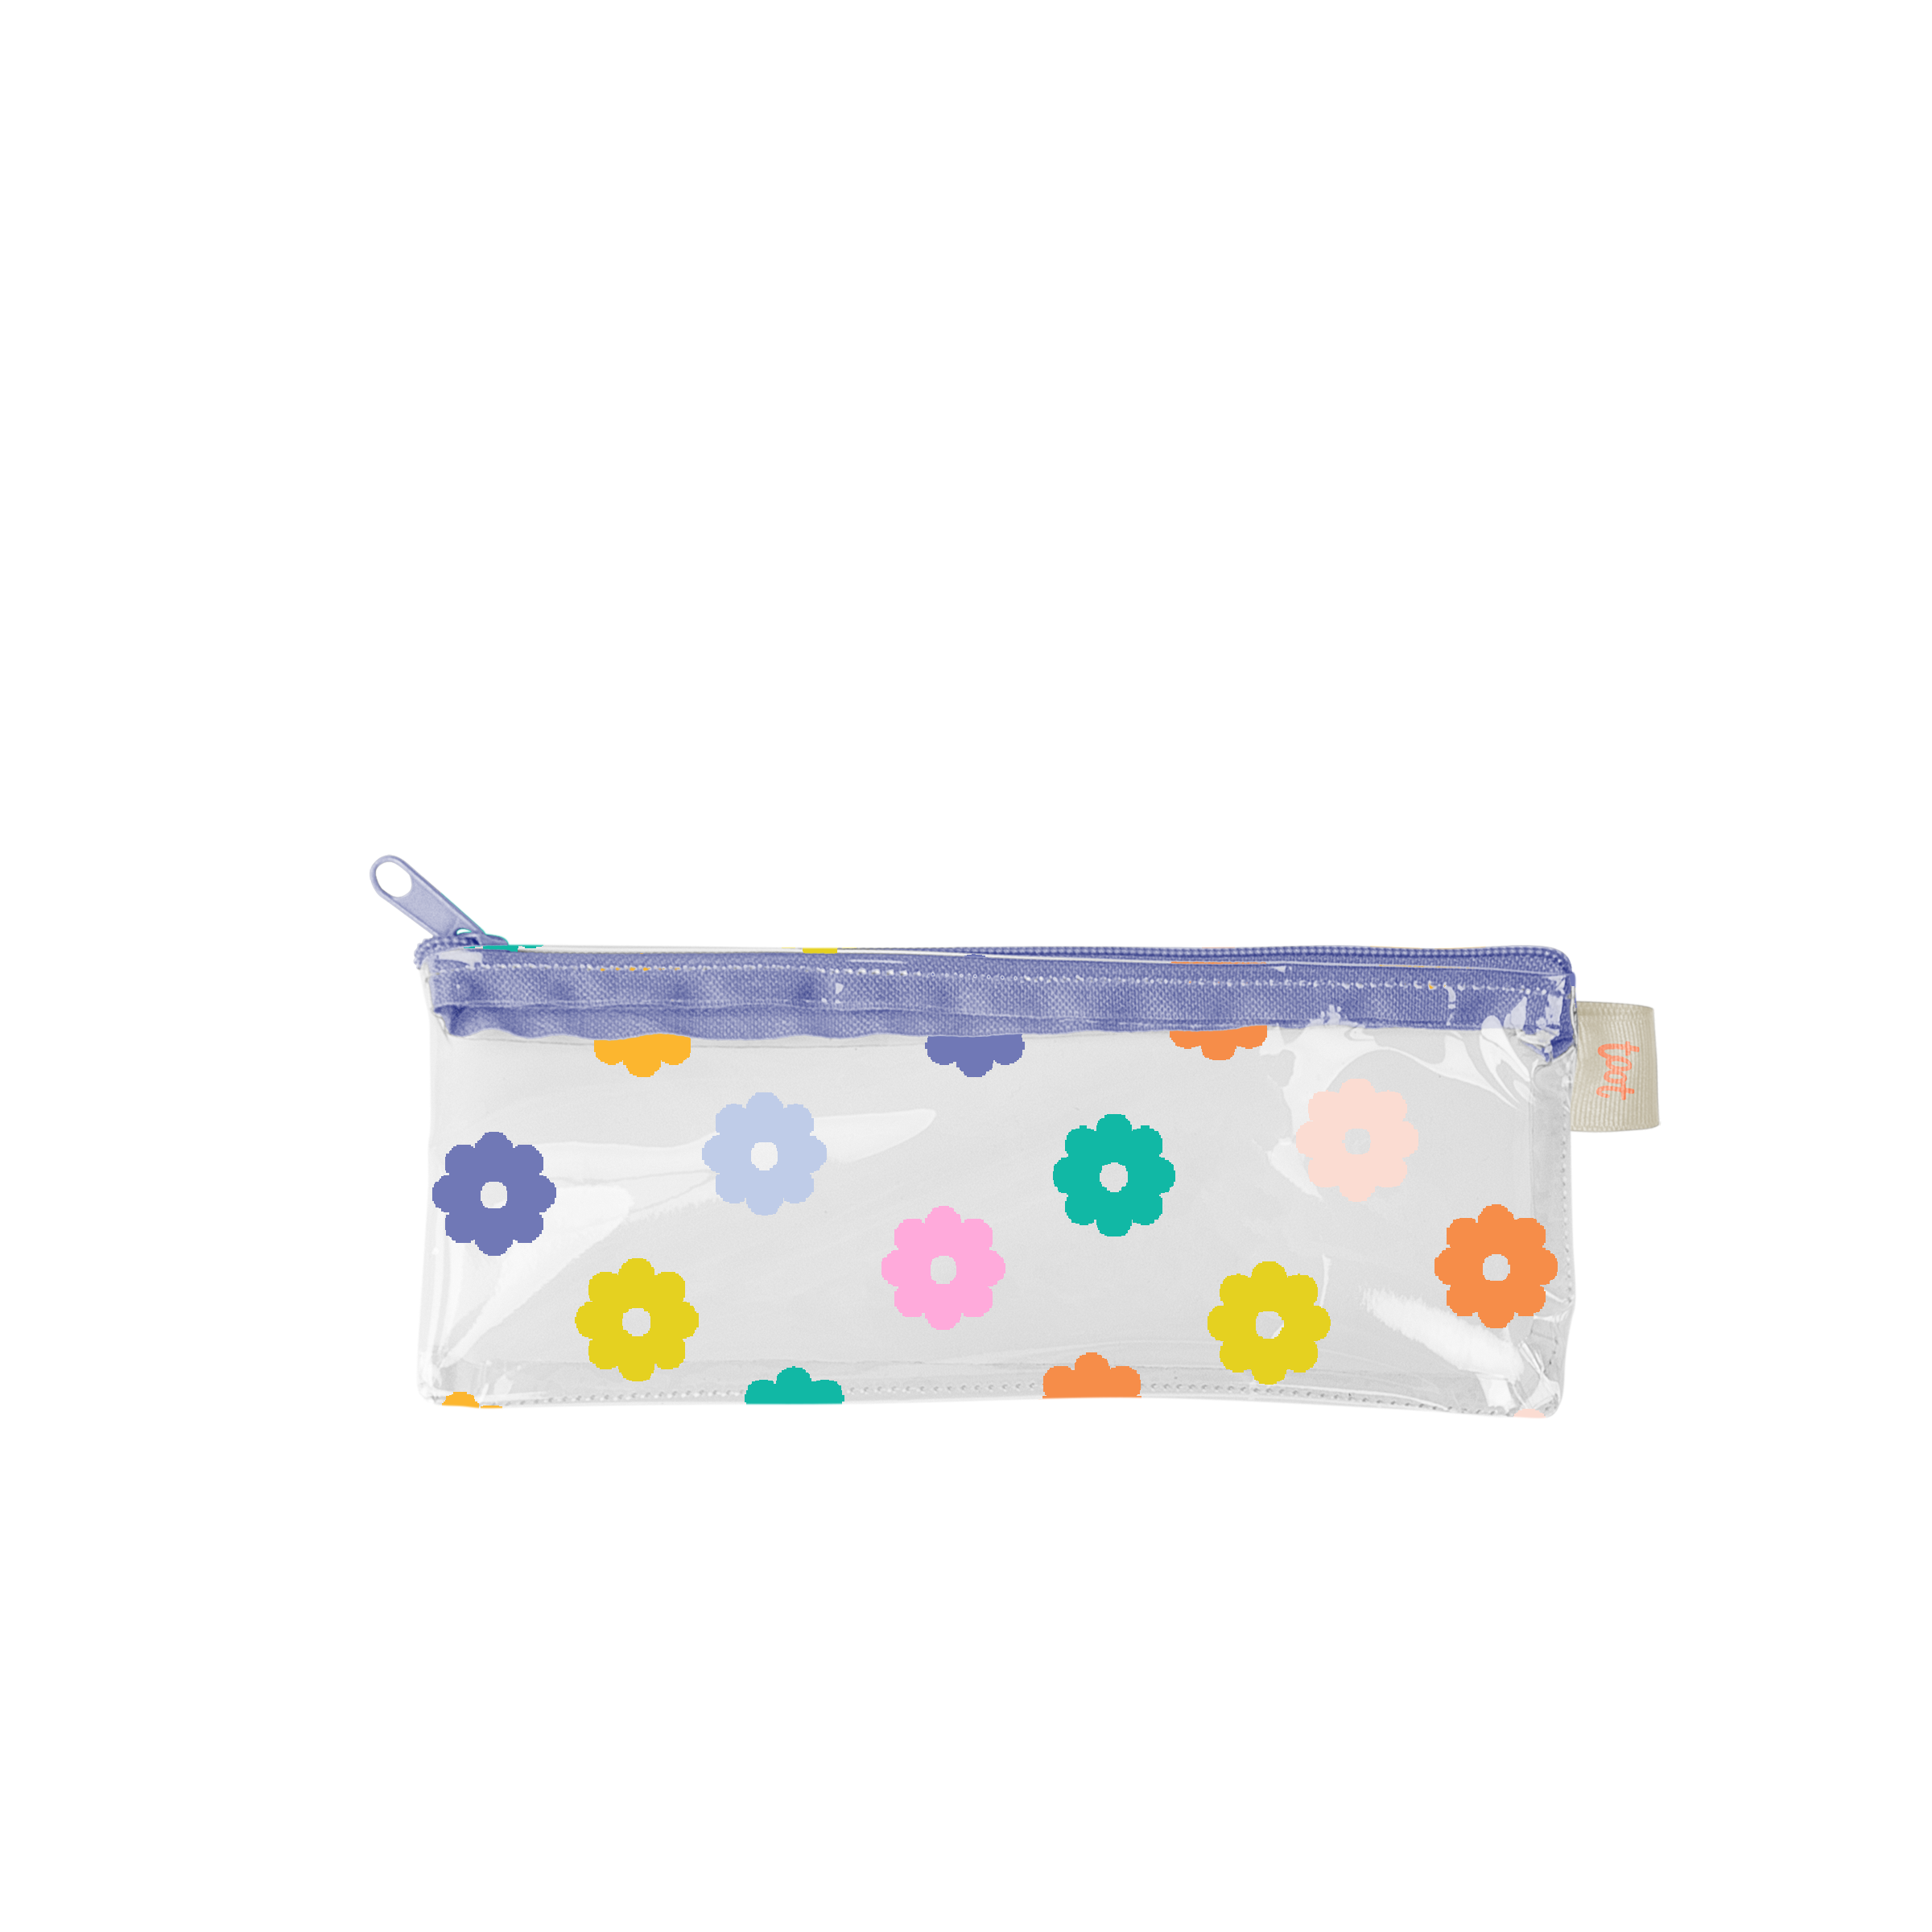 All the Things - Large Pencil Pouch - Talking Out of Turn